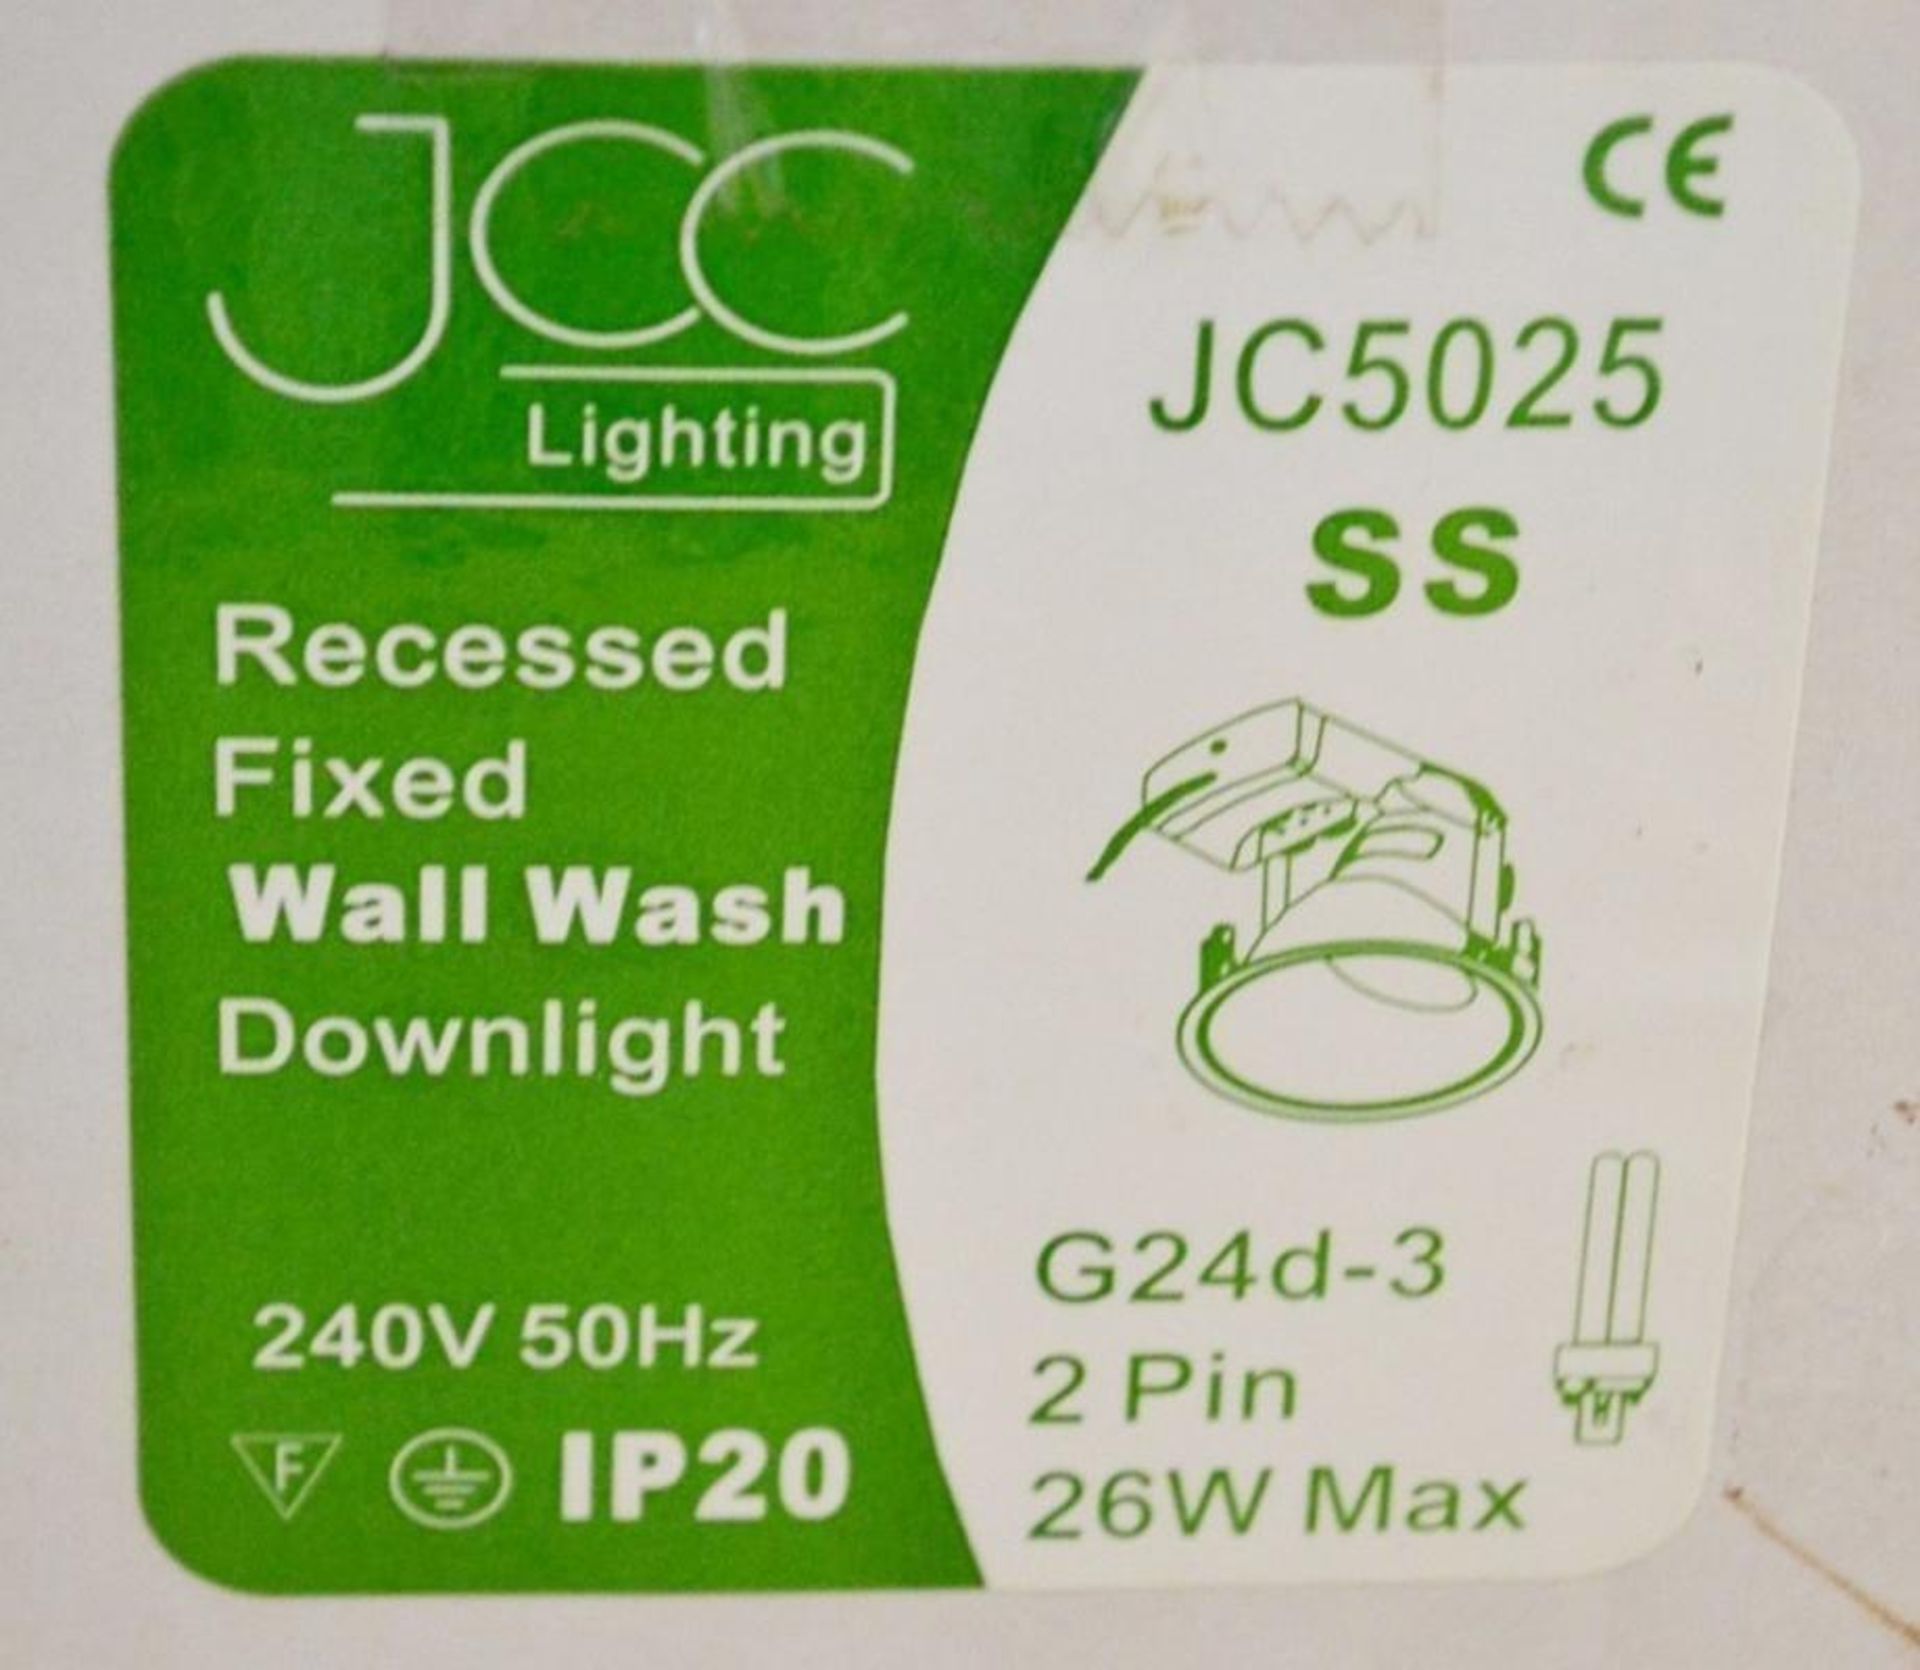 5 x JCC Lighting JC5025 Large Coral Range Commercial Recessed Downlight - Low Energy Mains Voltage - - Image 2 of 5